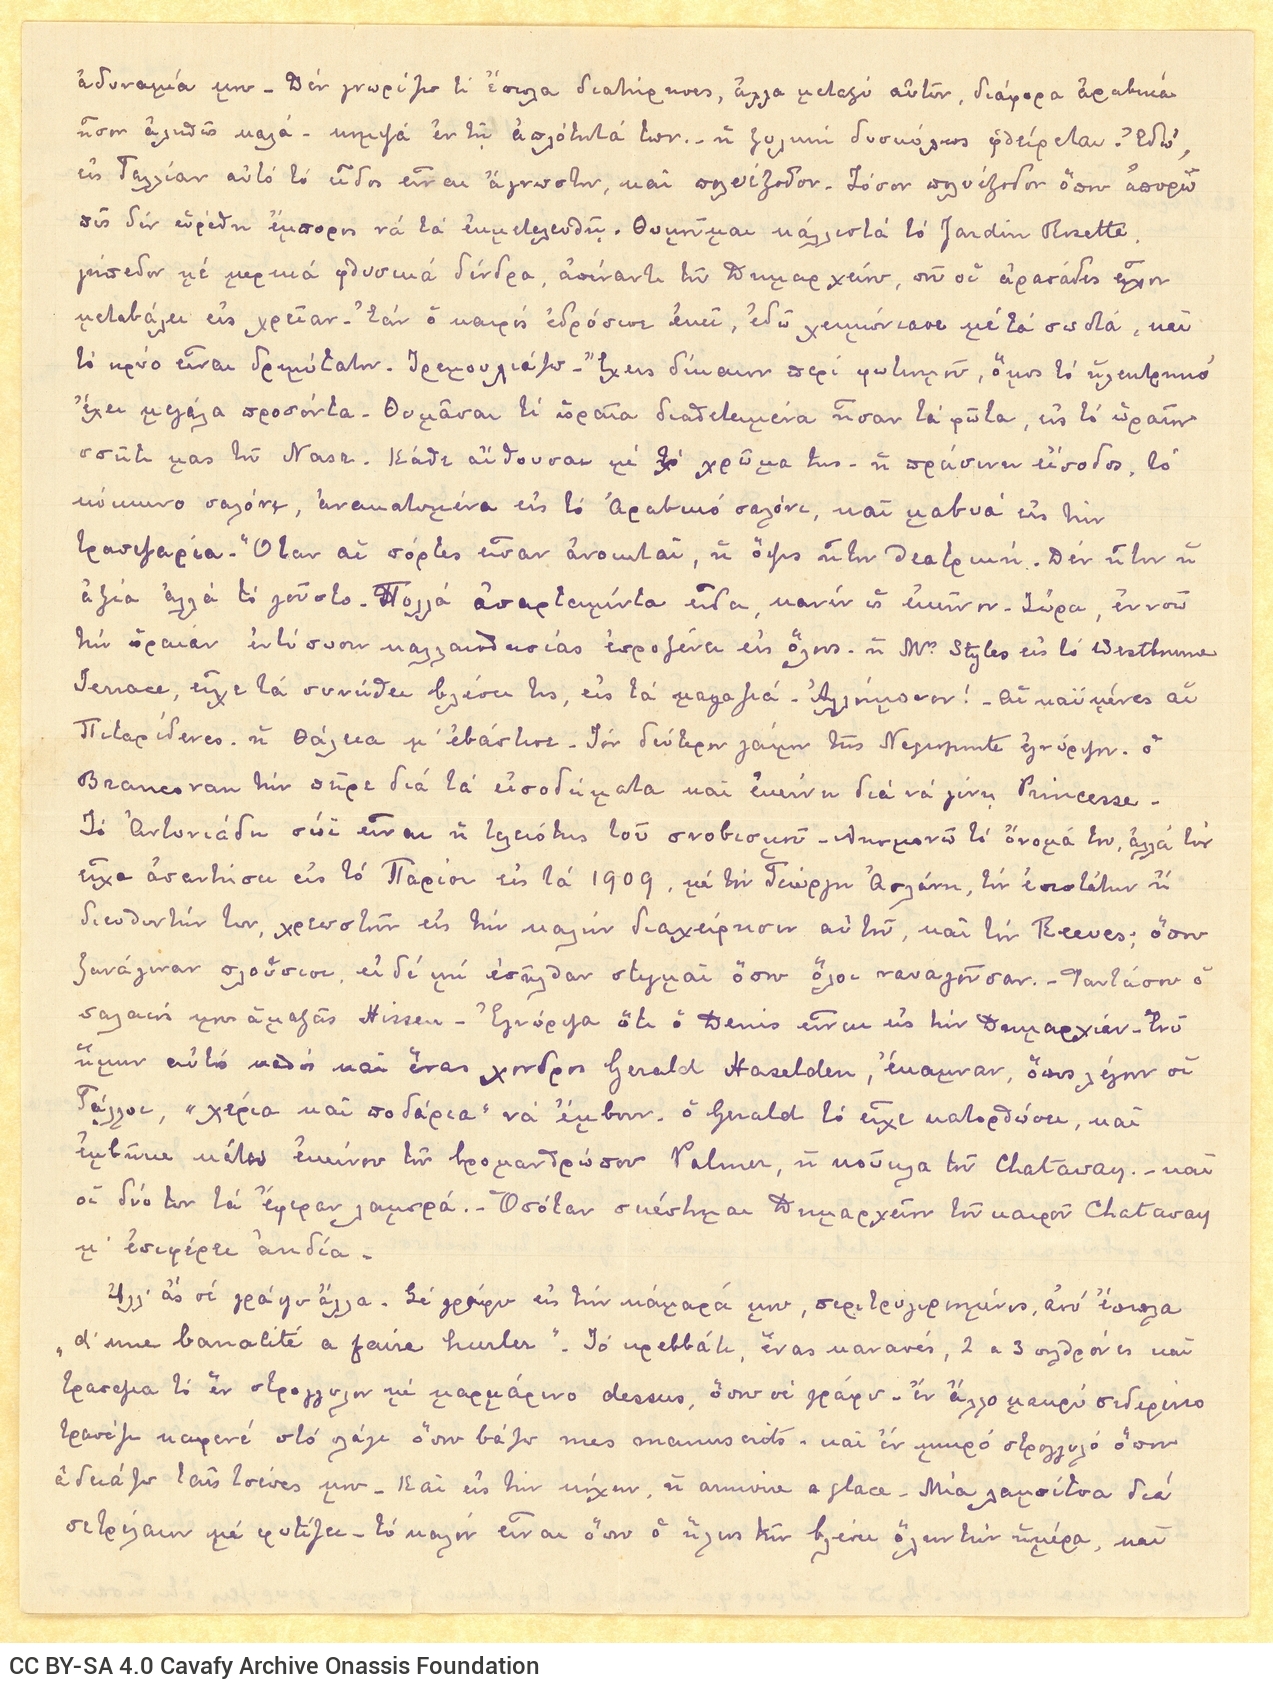 Handwritten letter by Paul Cavafy to C. P. Cavafy from Hyères, France, on a bifolio with notes to the recto of the second sh